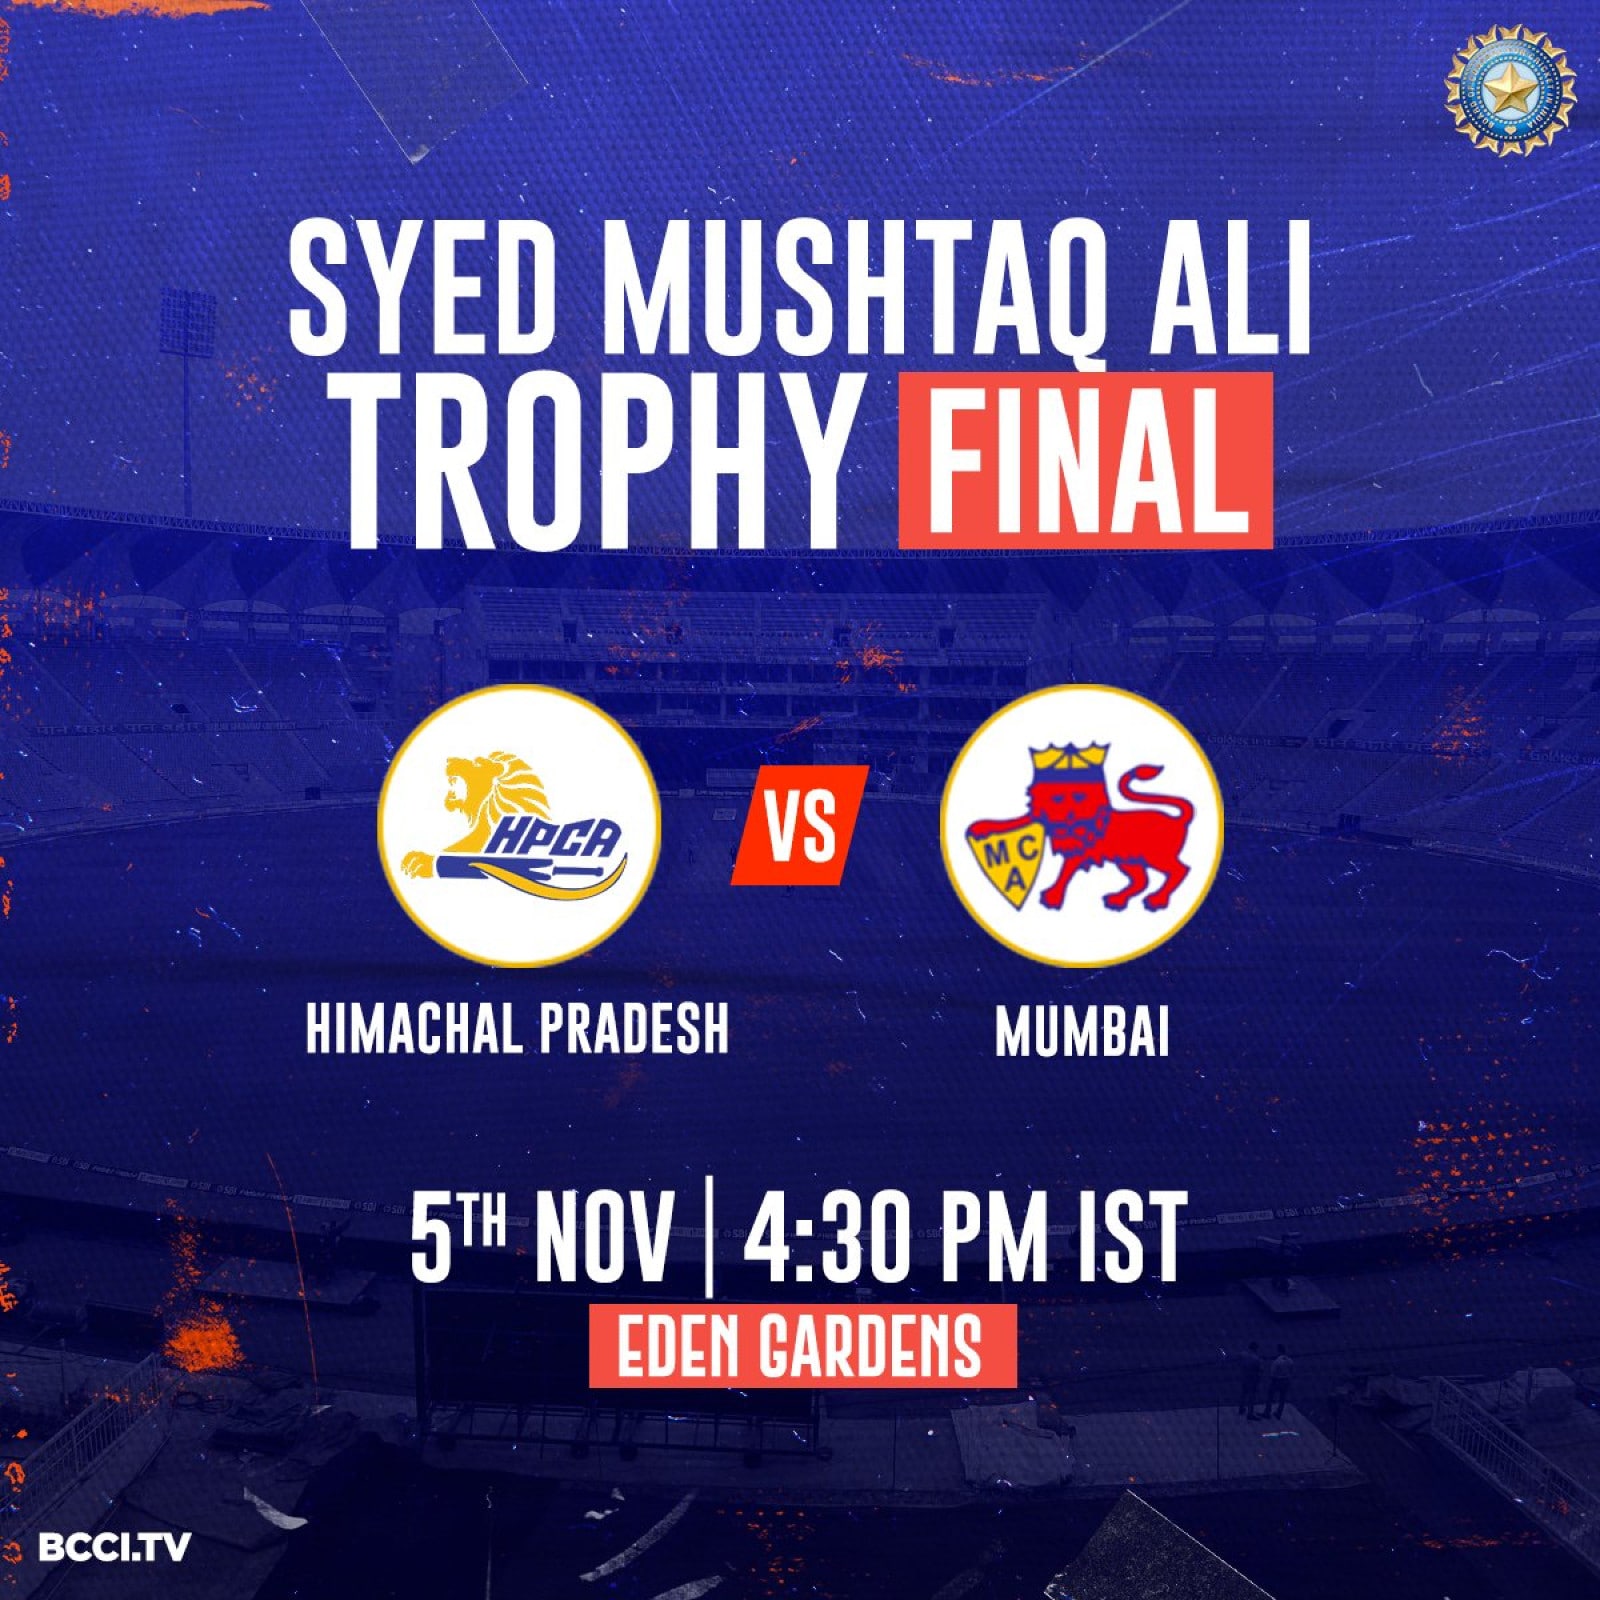 Himachal Pradesh vs Mumbai Live Streaming When and Where to Watch Syed Mushtaq Ali Trophy final Live Coverage on Live TV Online